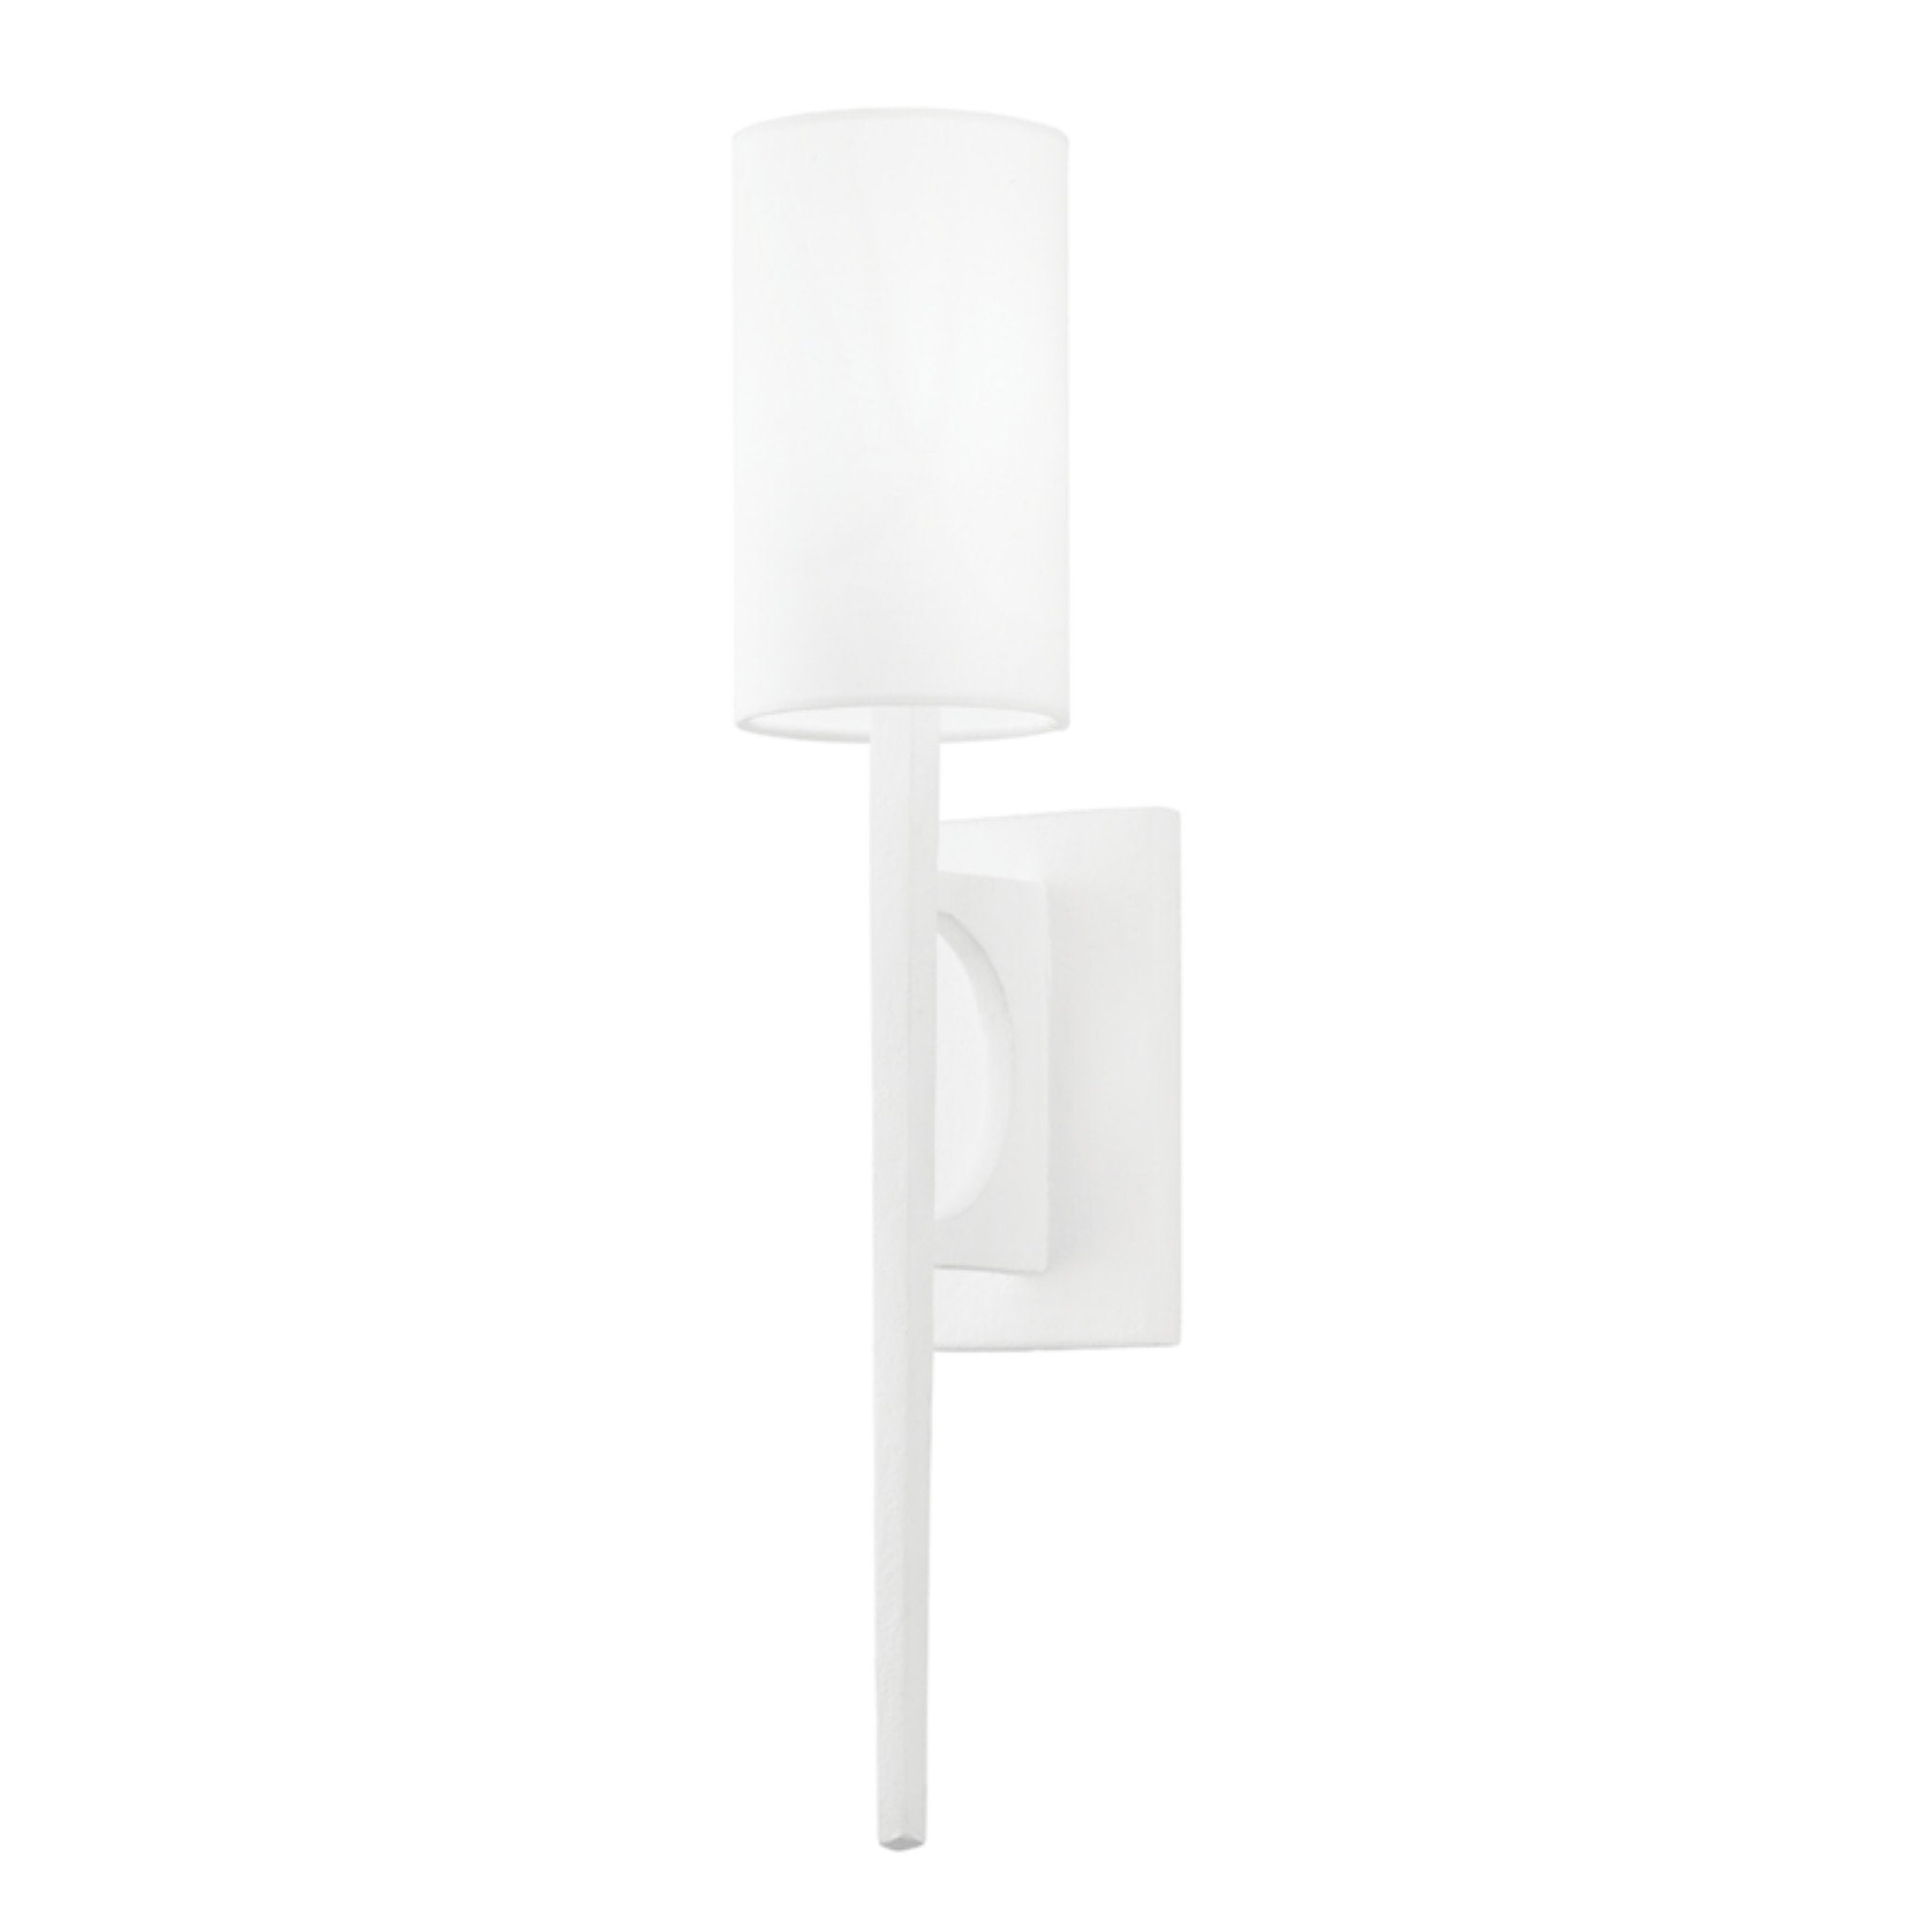 Wallace 1 Light Wall Sconce in Gesso White